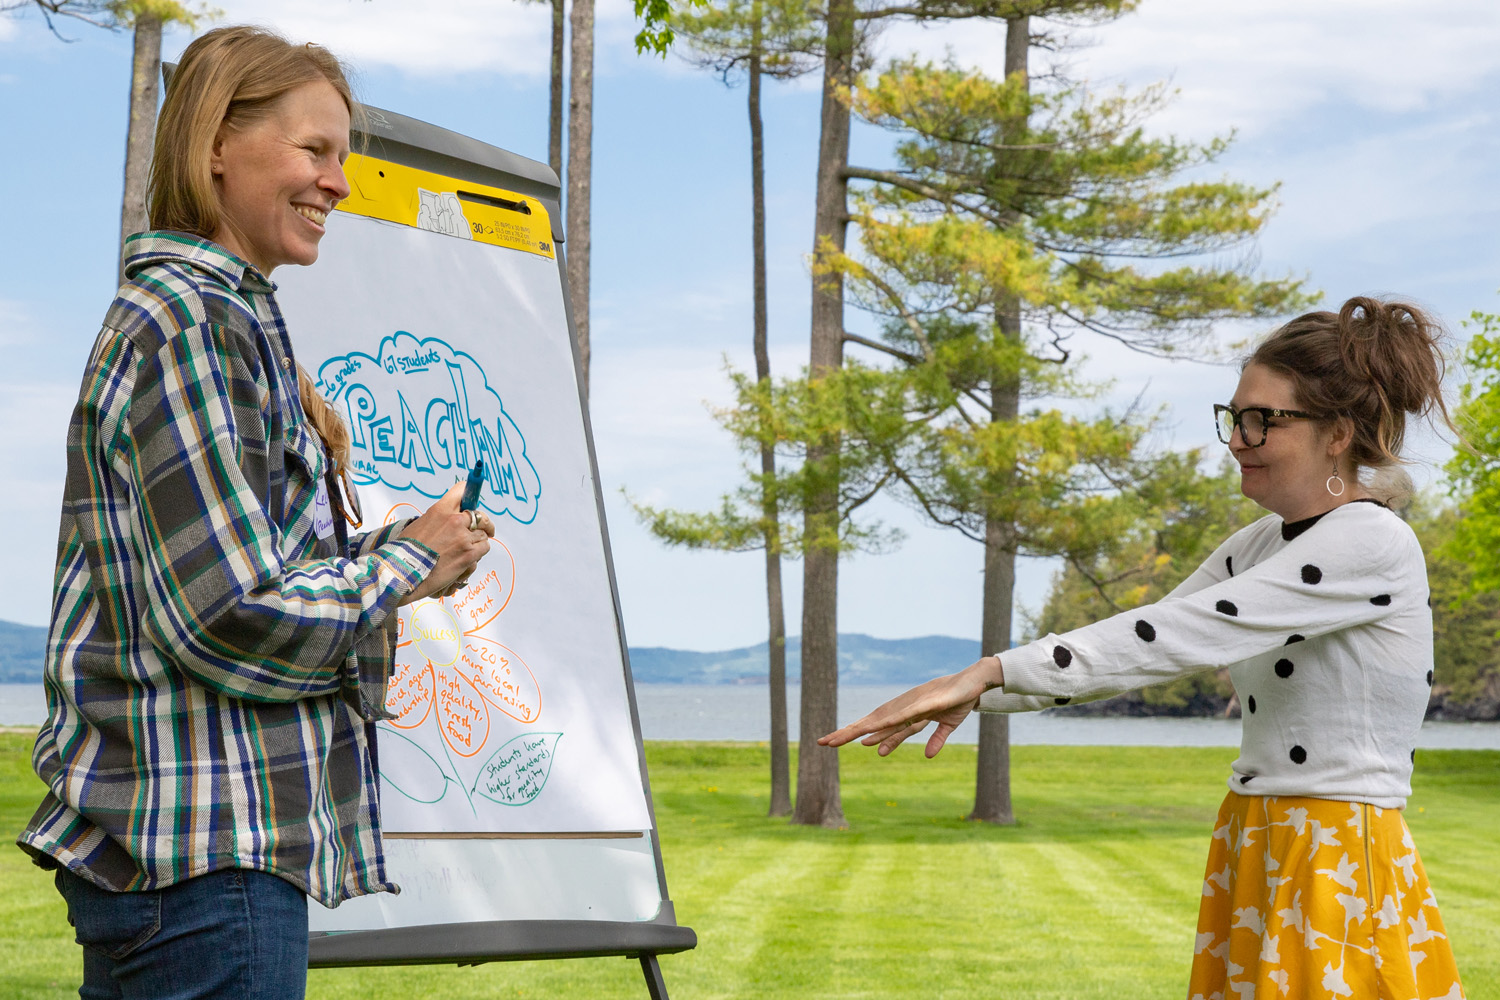 Two educators smile and collaborate on an action plan, illustrated in bright colors on a large flipchart